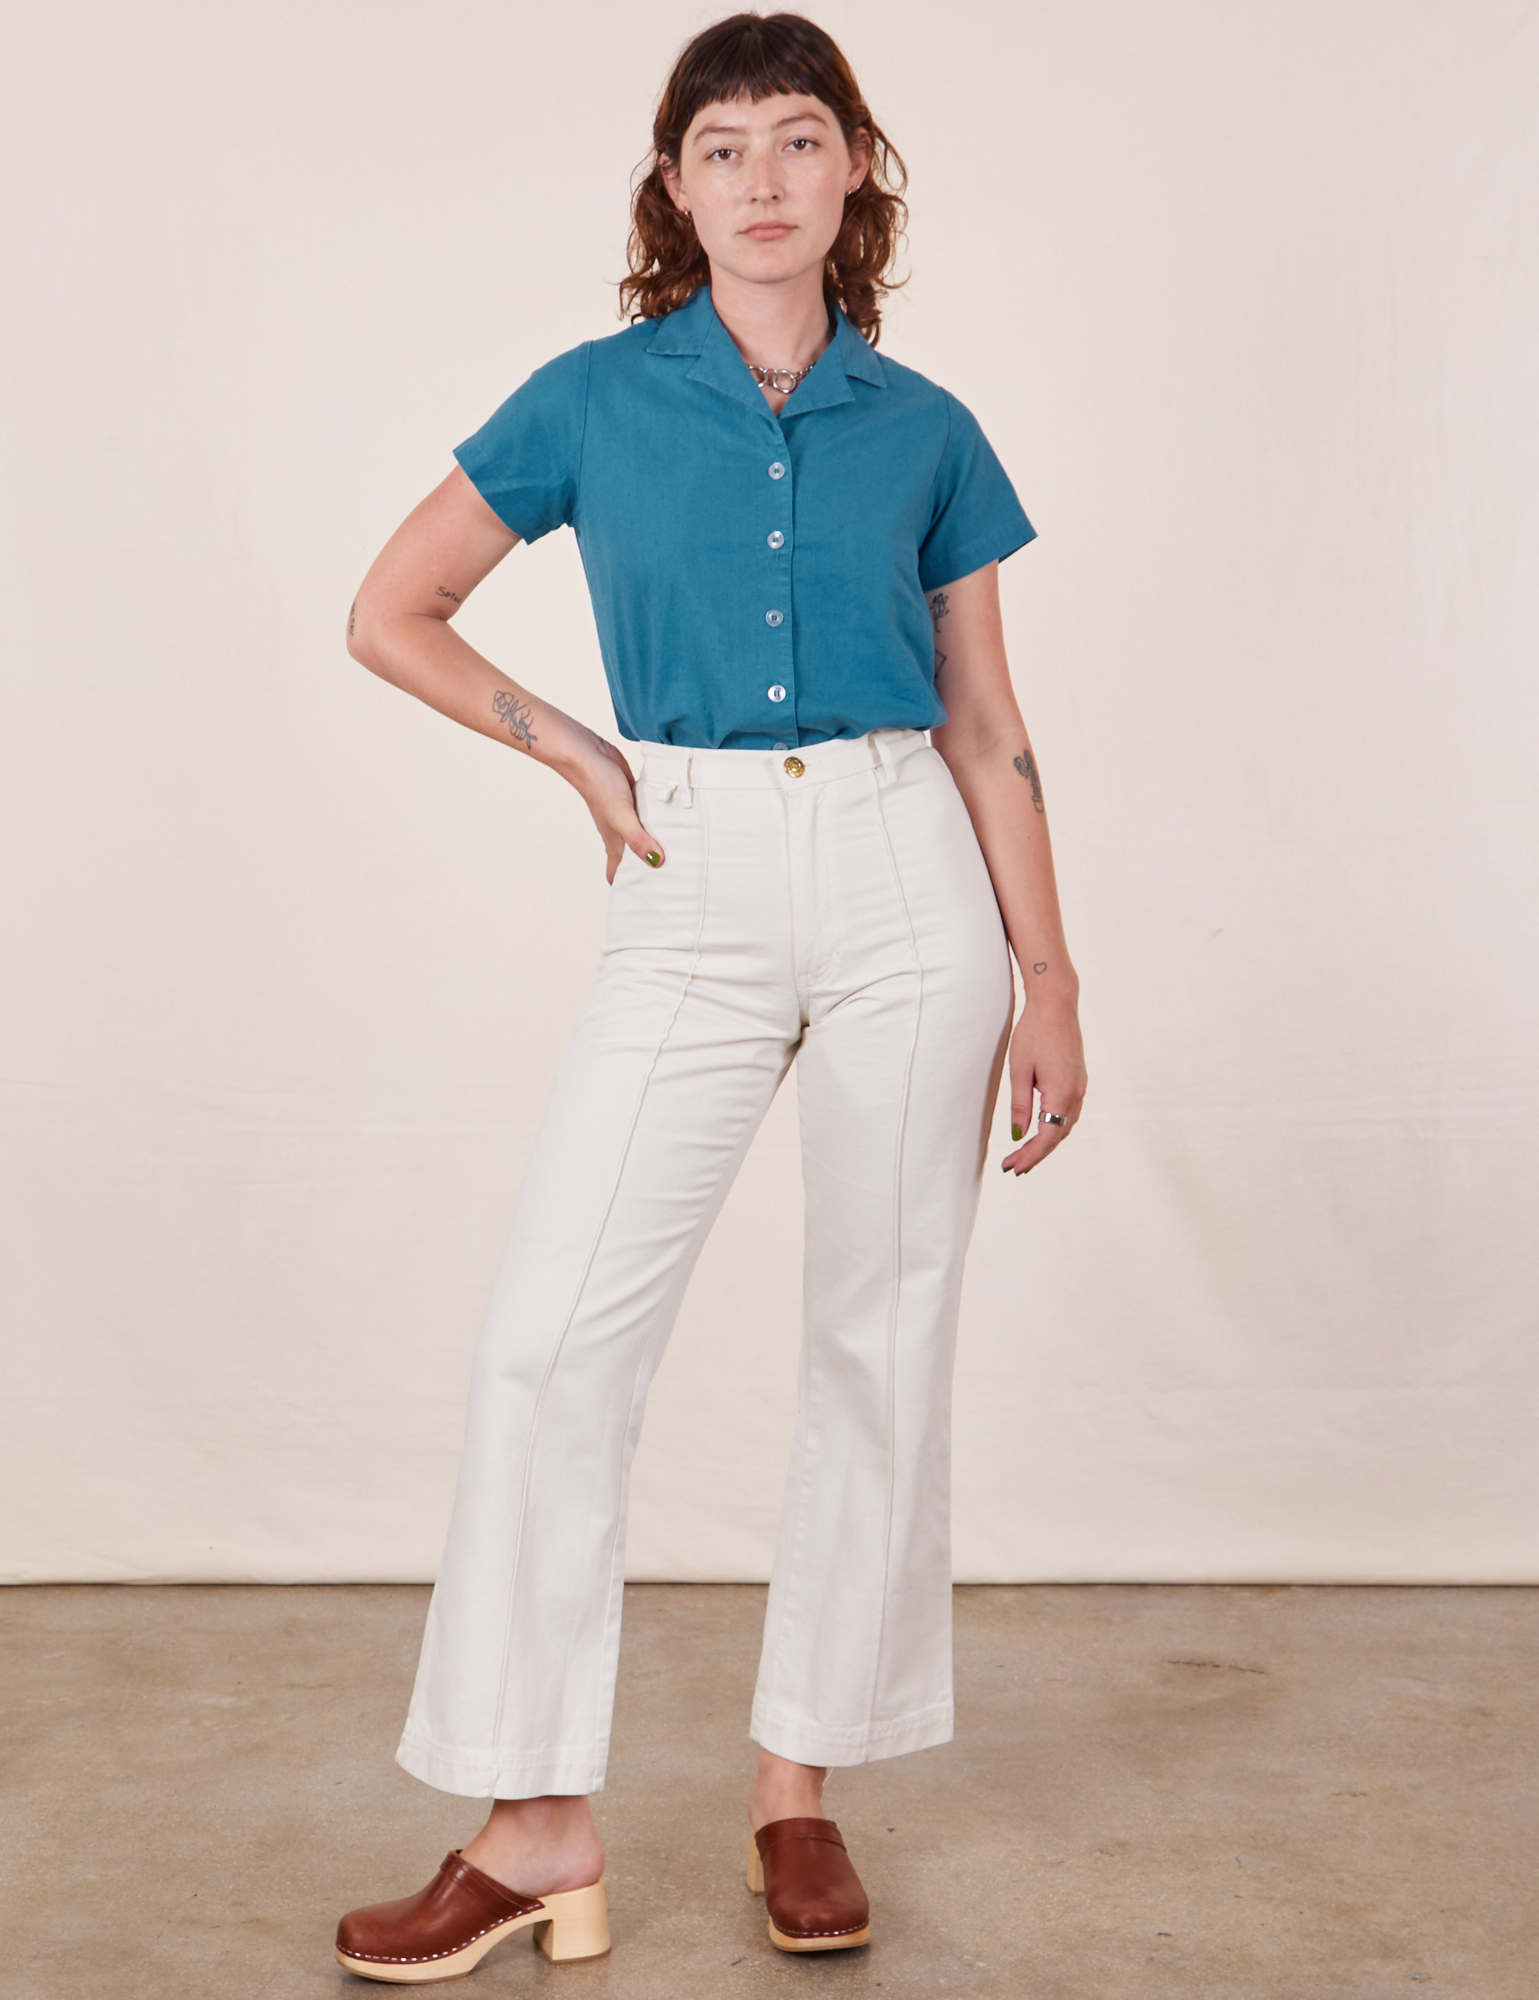 Alex is wearing Pantry Button-Up in Marine Blue and vintage off-white Western Pants